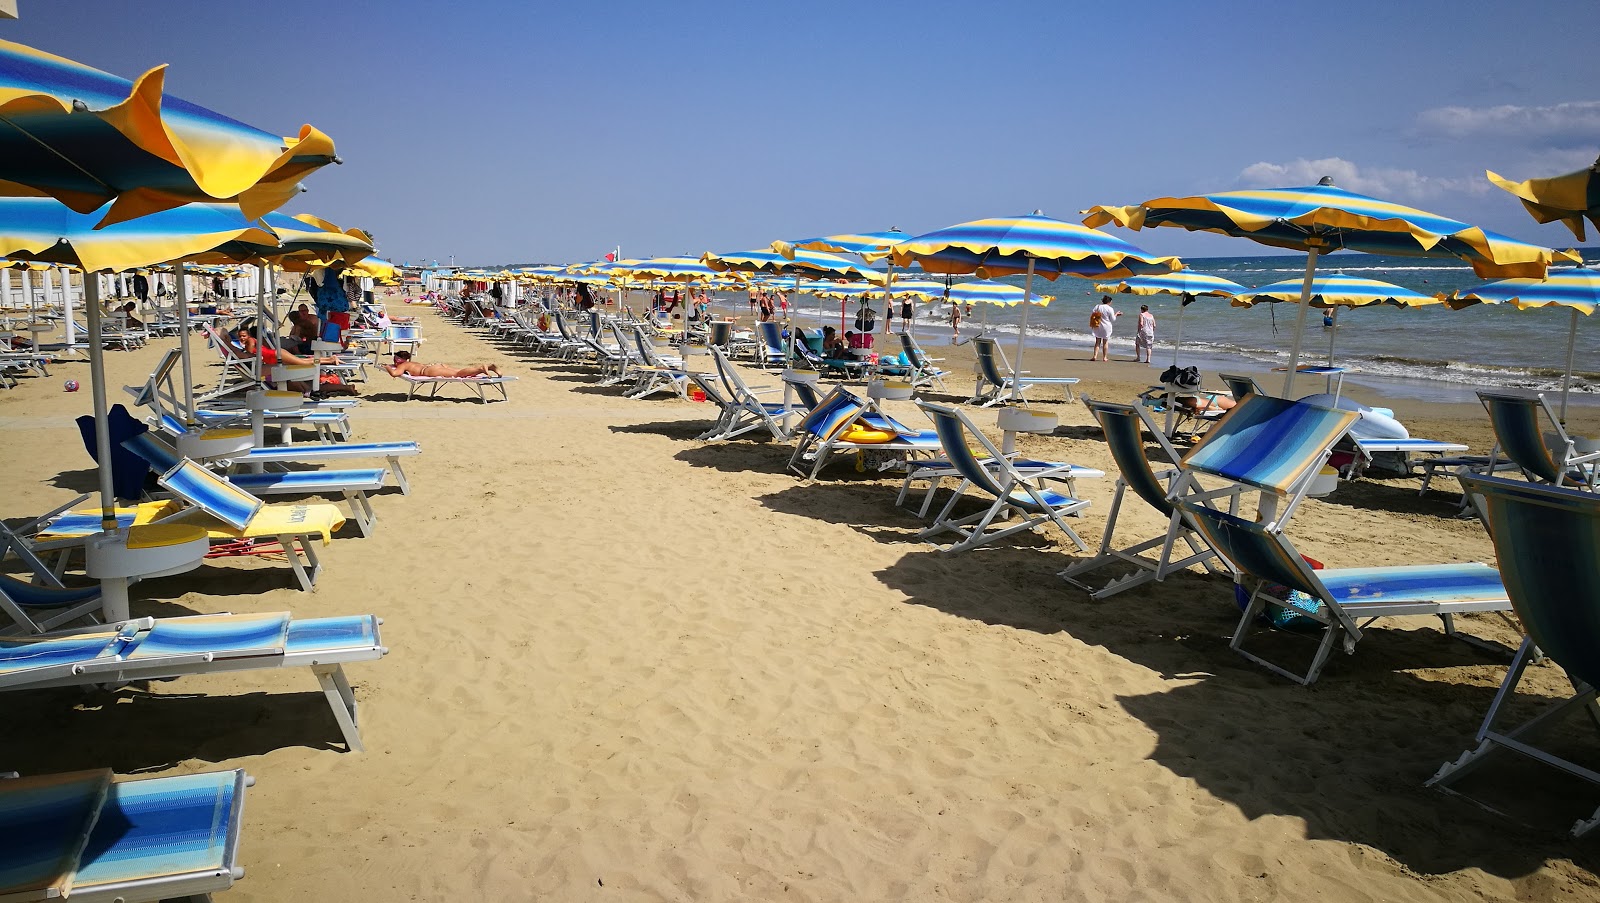 Photo of Nettuno beach II - popular place among relax connoisseurs